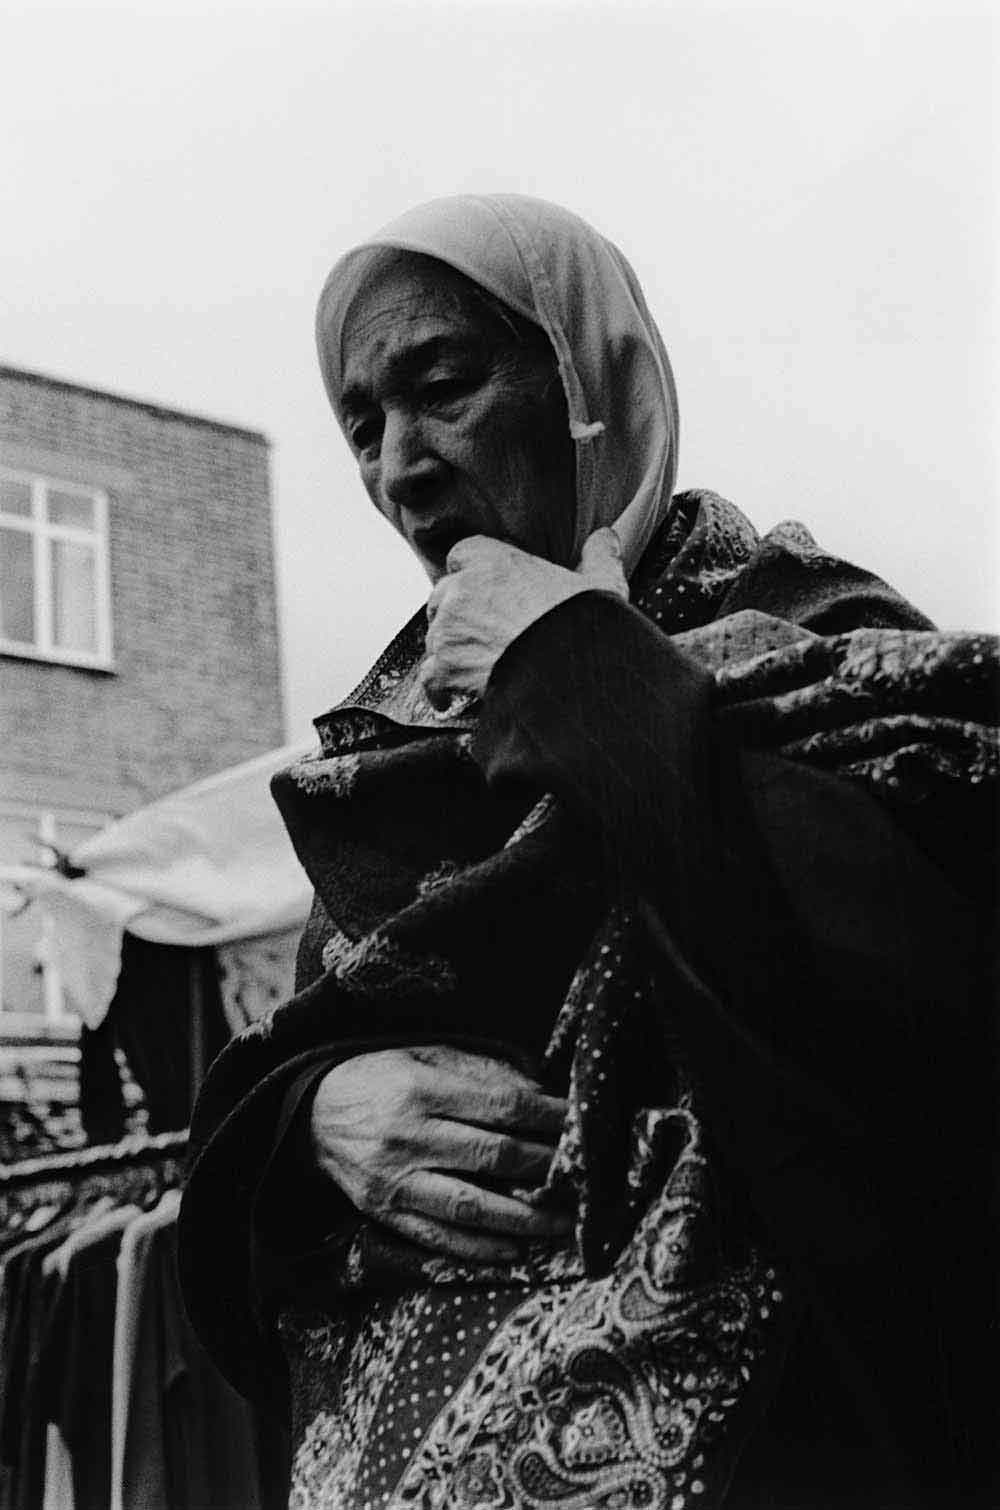 Asian woman in a headscarf, part of a series of photographs by Stephie Devred that captures the unique spirit of the East London street market, Roman Road Market.